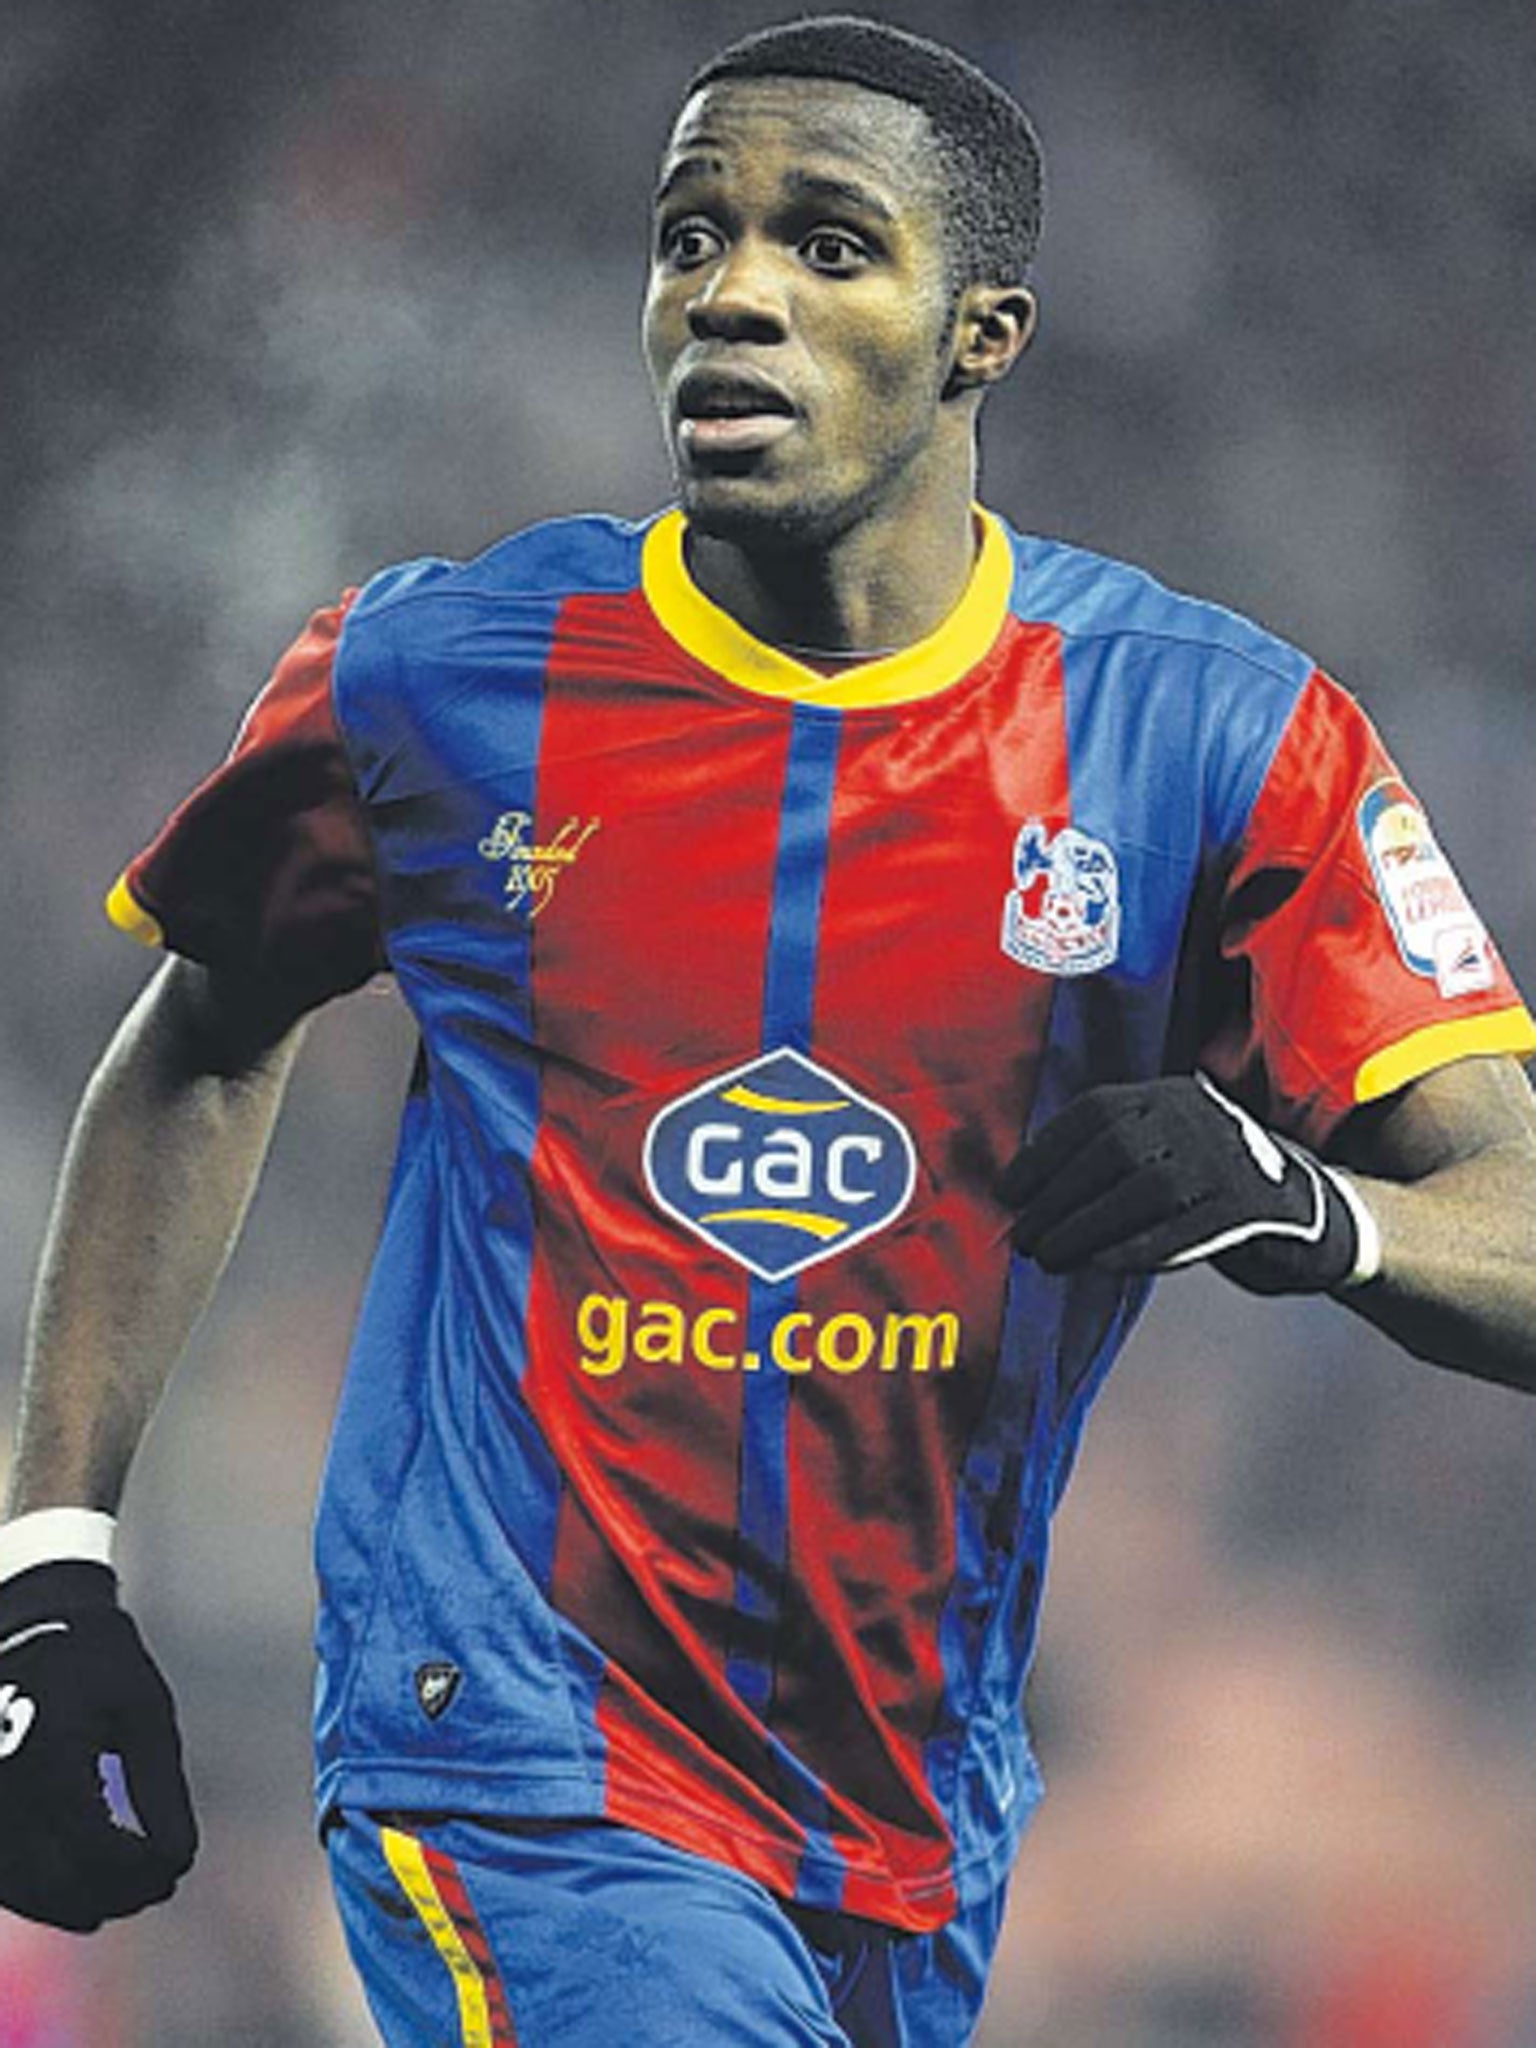 Wilfried Zaha destined to be the ‘next big thing’?